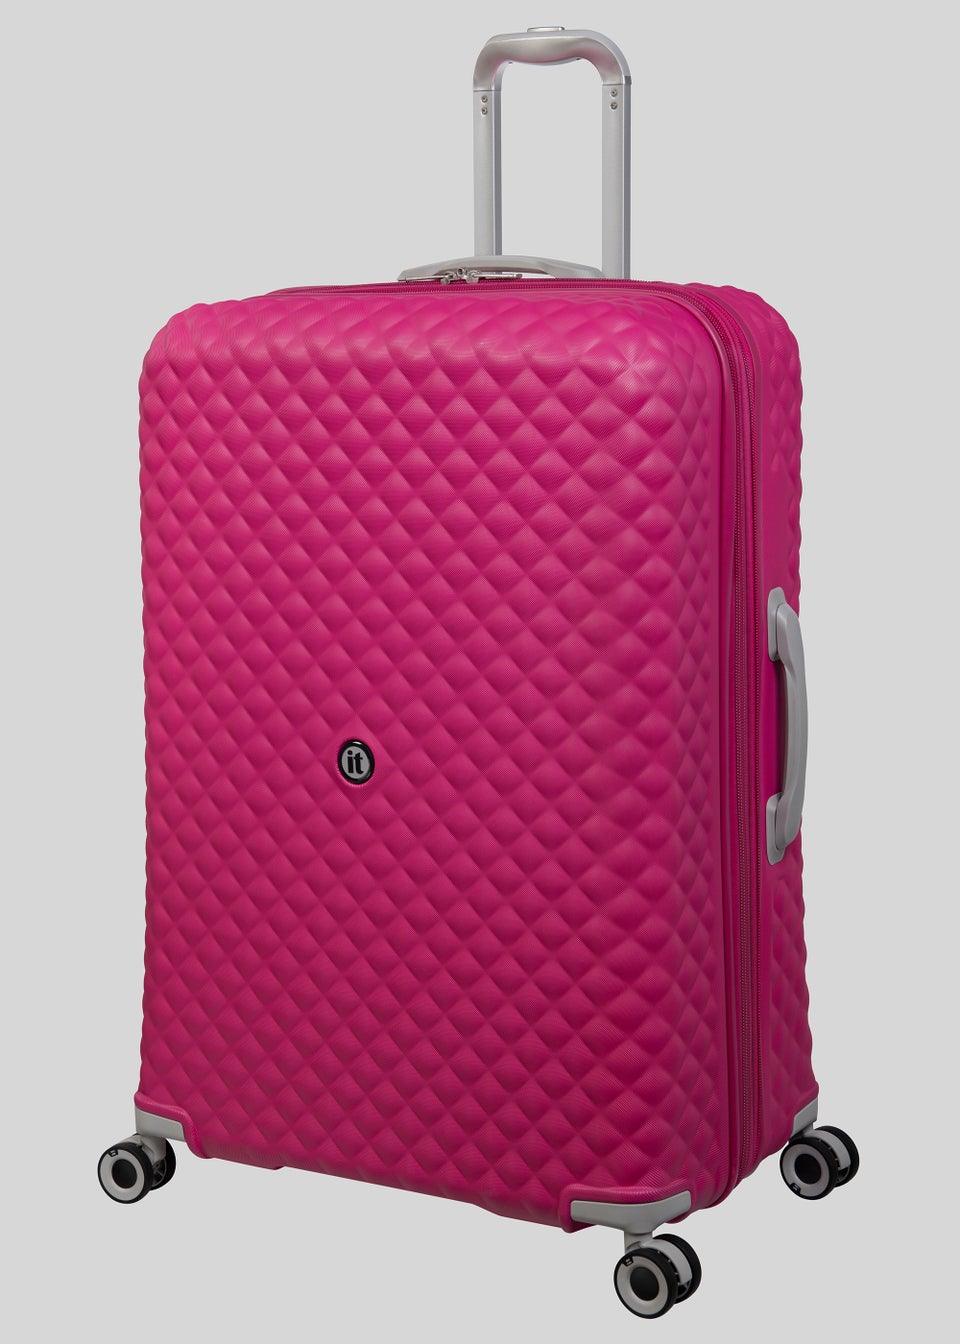 IT Luggage Fuchsia Quilted Suitcase - Matalan